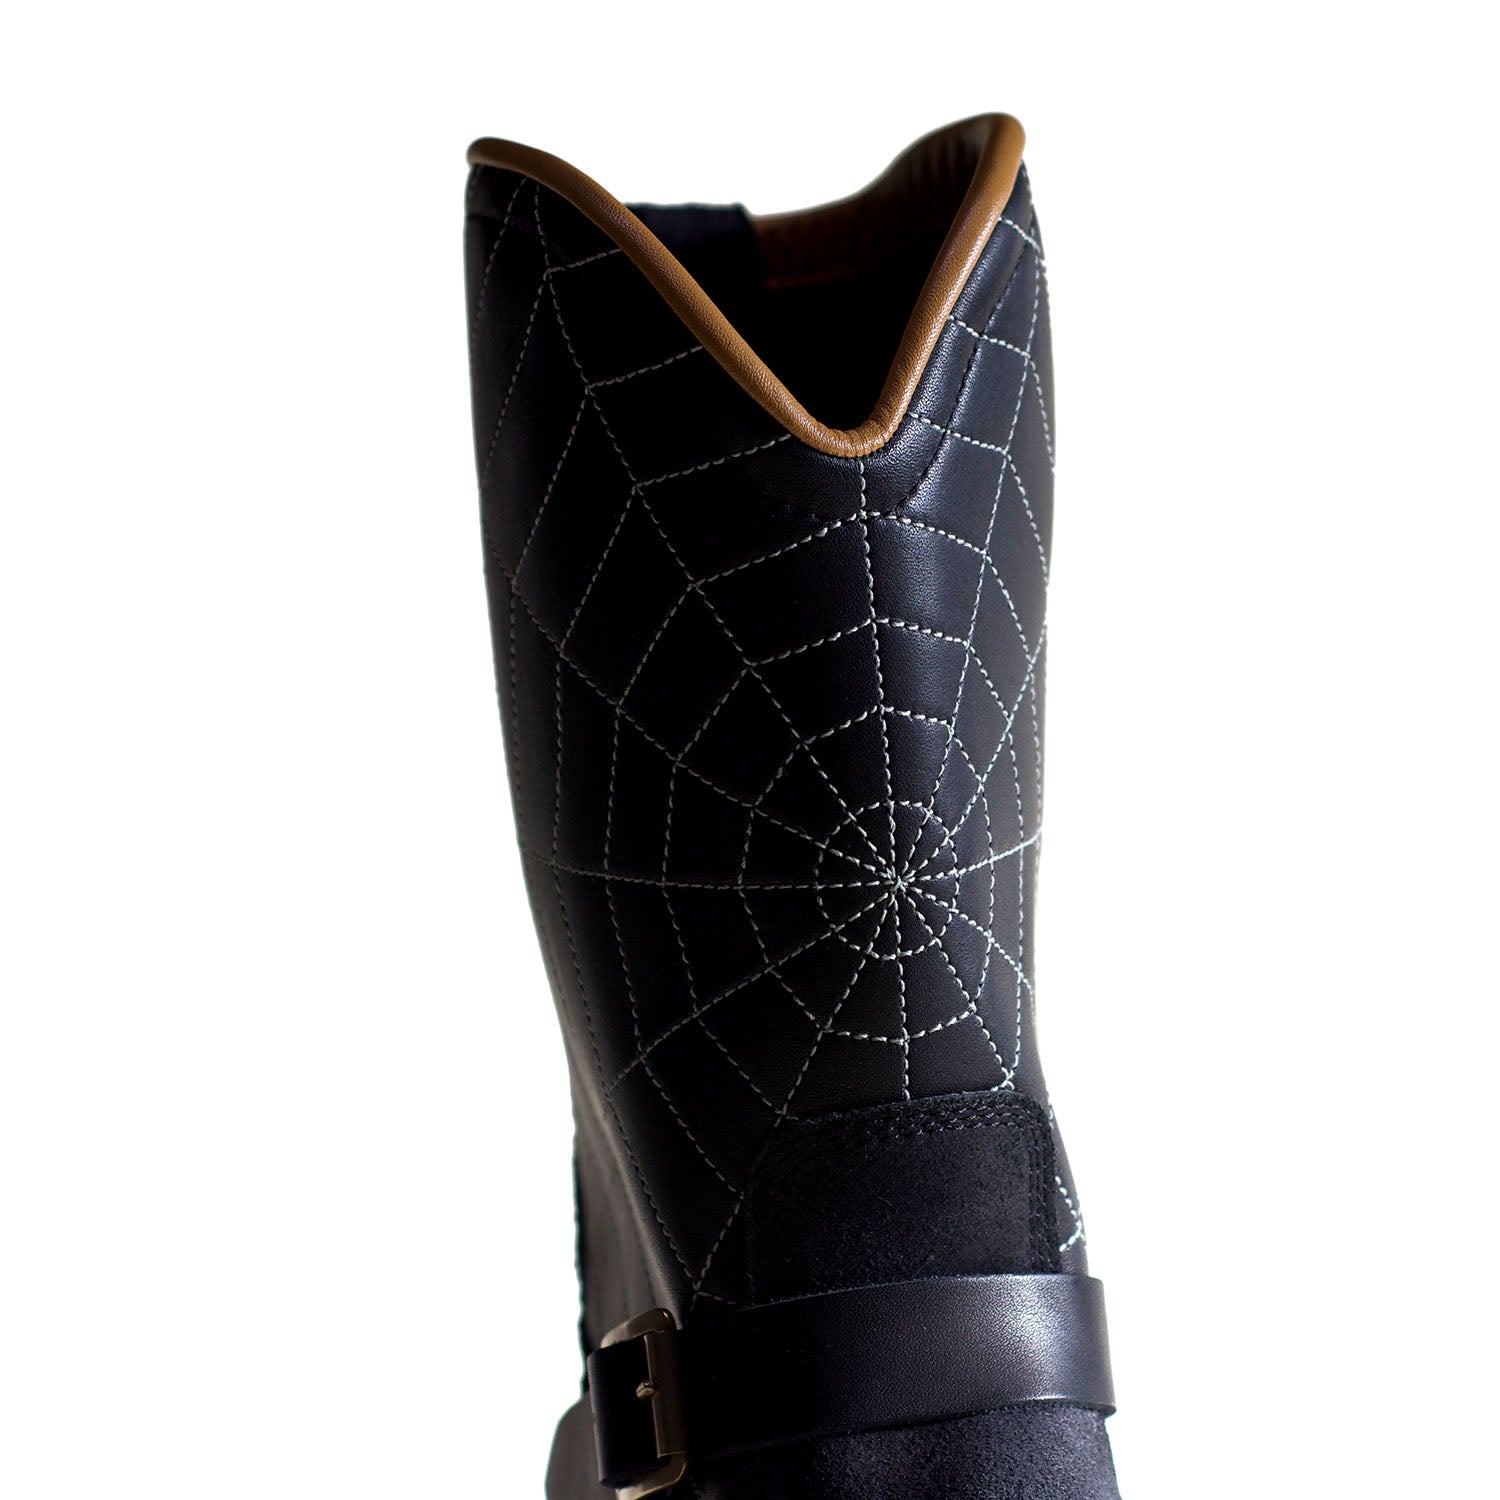 SPIDER ENGINEER BOOTS - May club